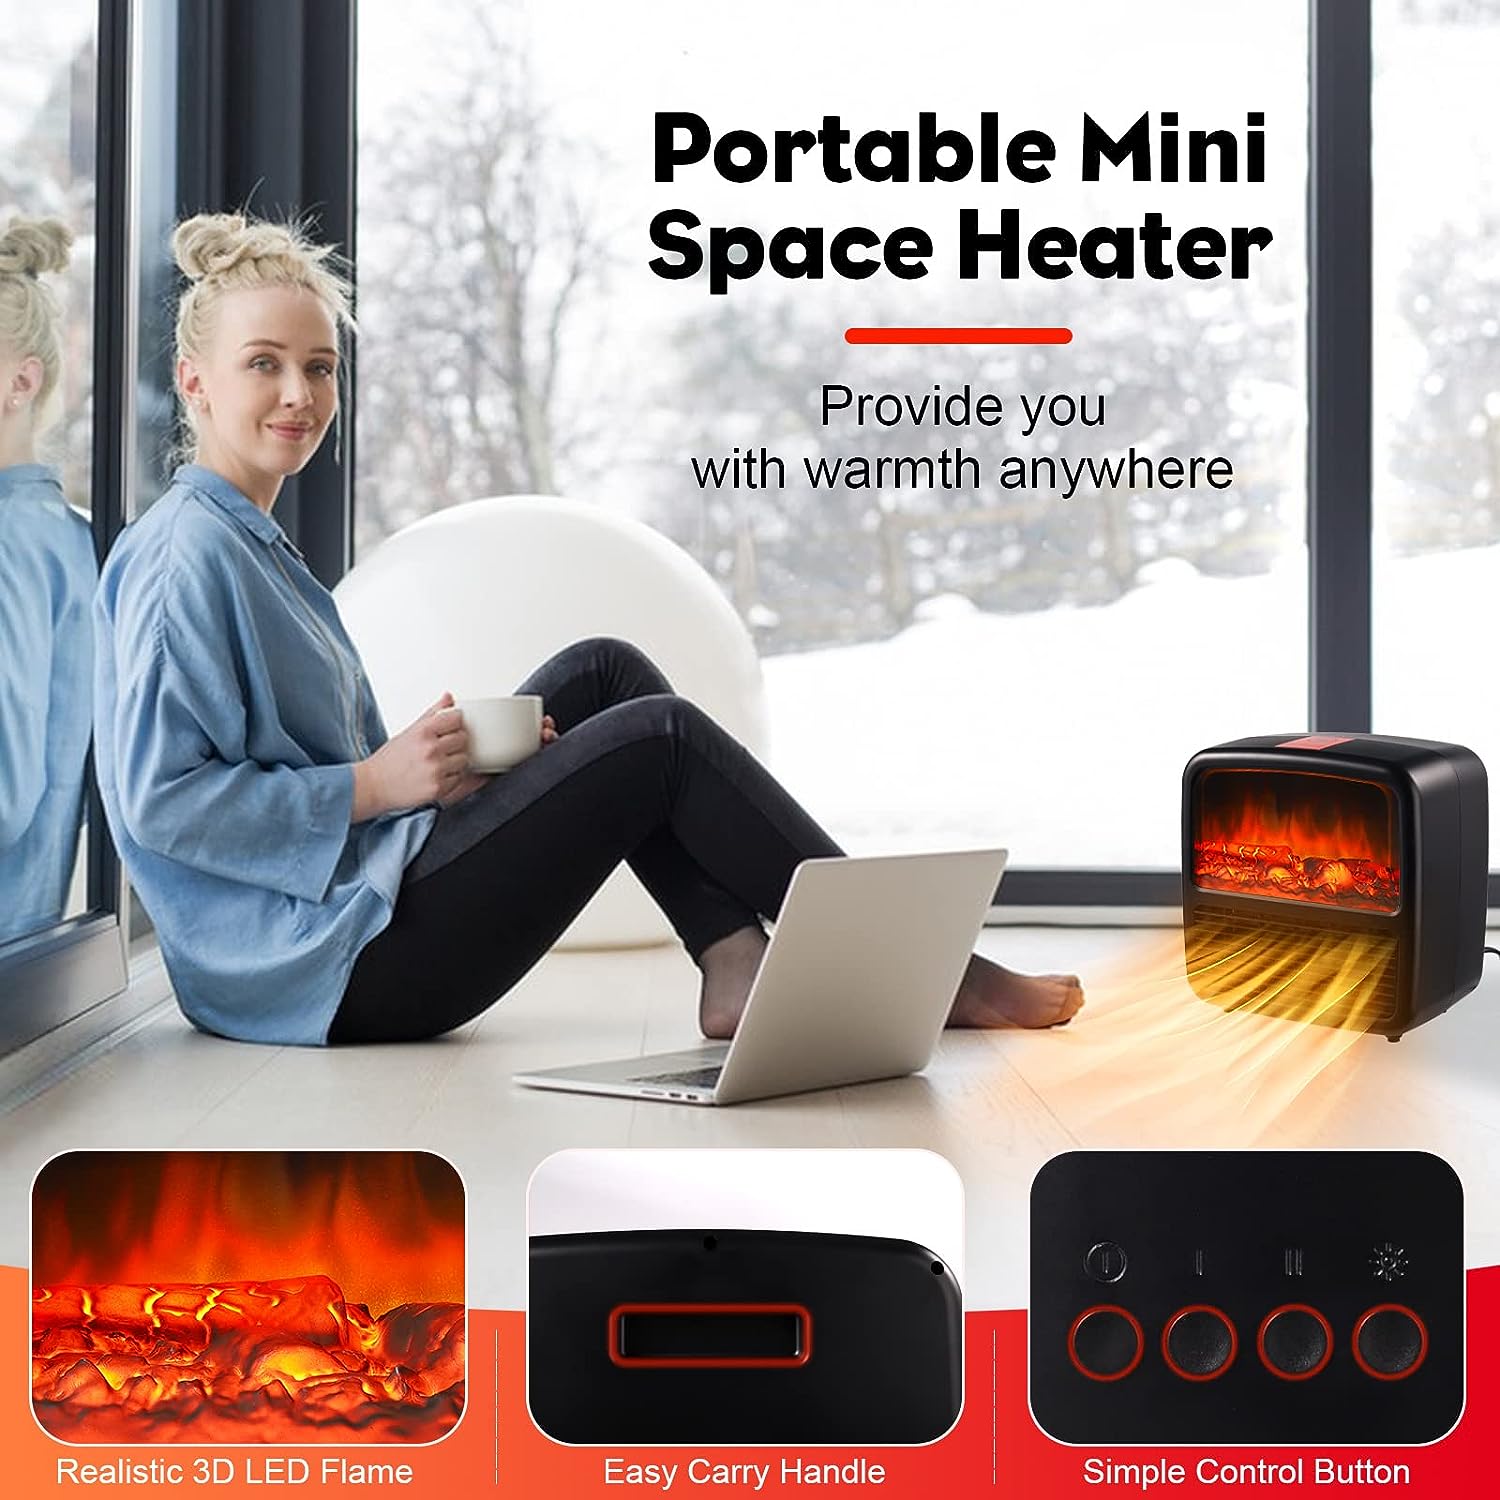 MACALOCA Space Heater, 1500W/1000W Space Heaters for Indoor Use, Energy Efficient Fireplace Dynamic Flame Small Space Heater,PTC Ceramic Fast Heating Portable Space Heater for Office,Home,Bedroom,Desk